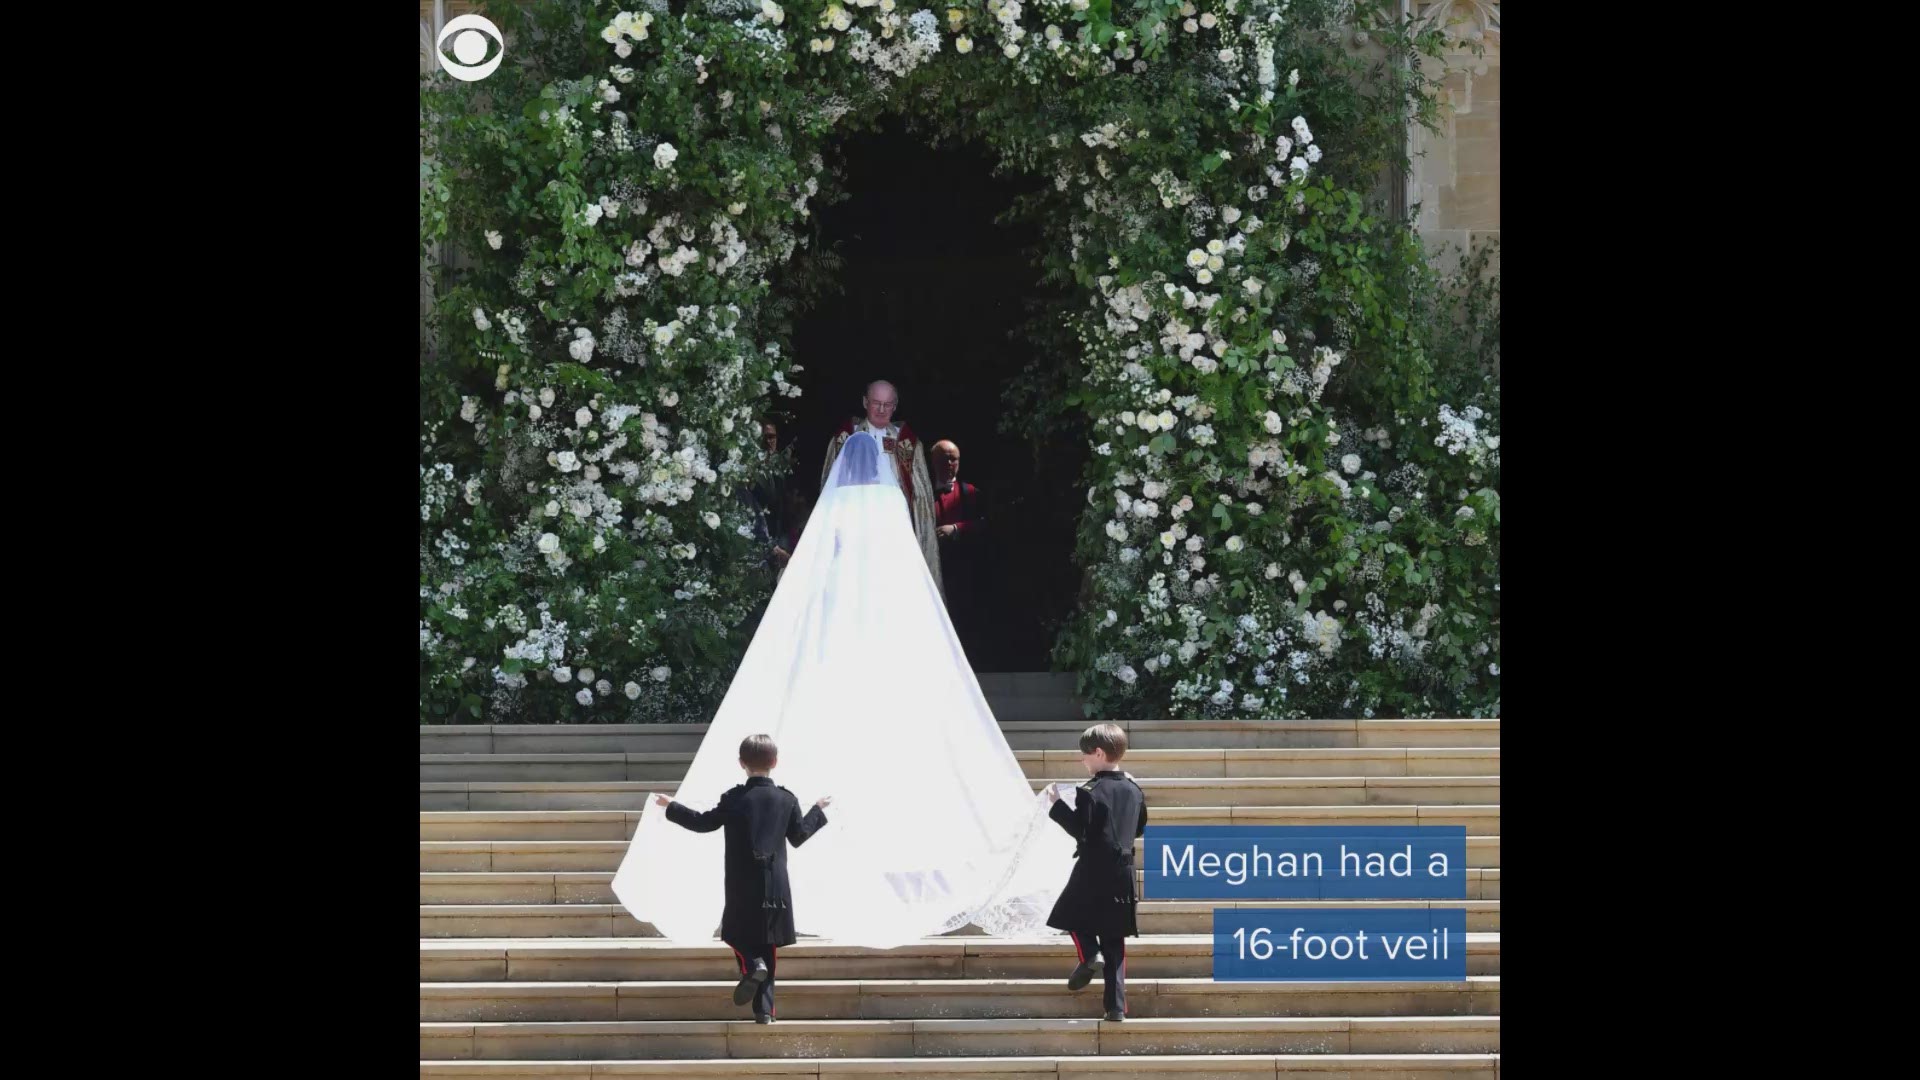 Meghan Markle wore a Givenchy dress for her wedding.  How long was the veil? Where did she get the tiara, and what was so special about her bouquet?